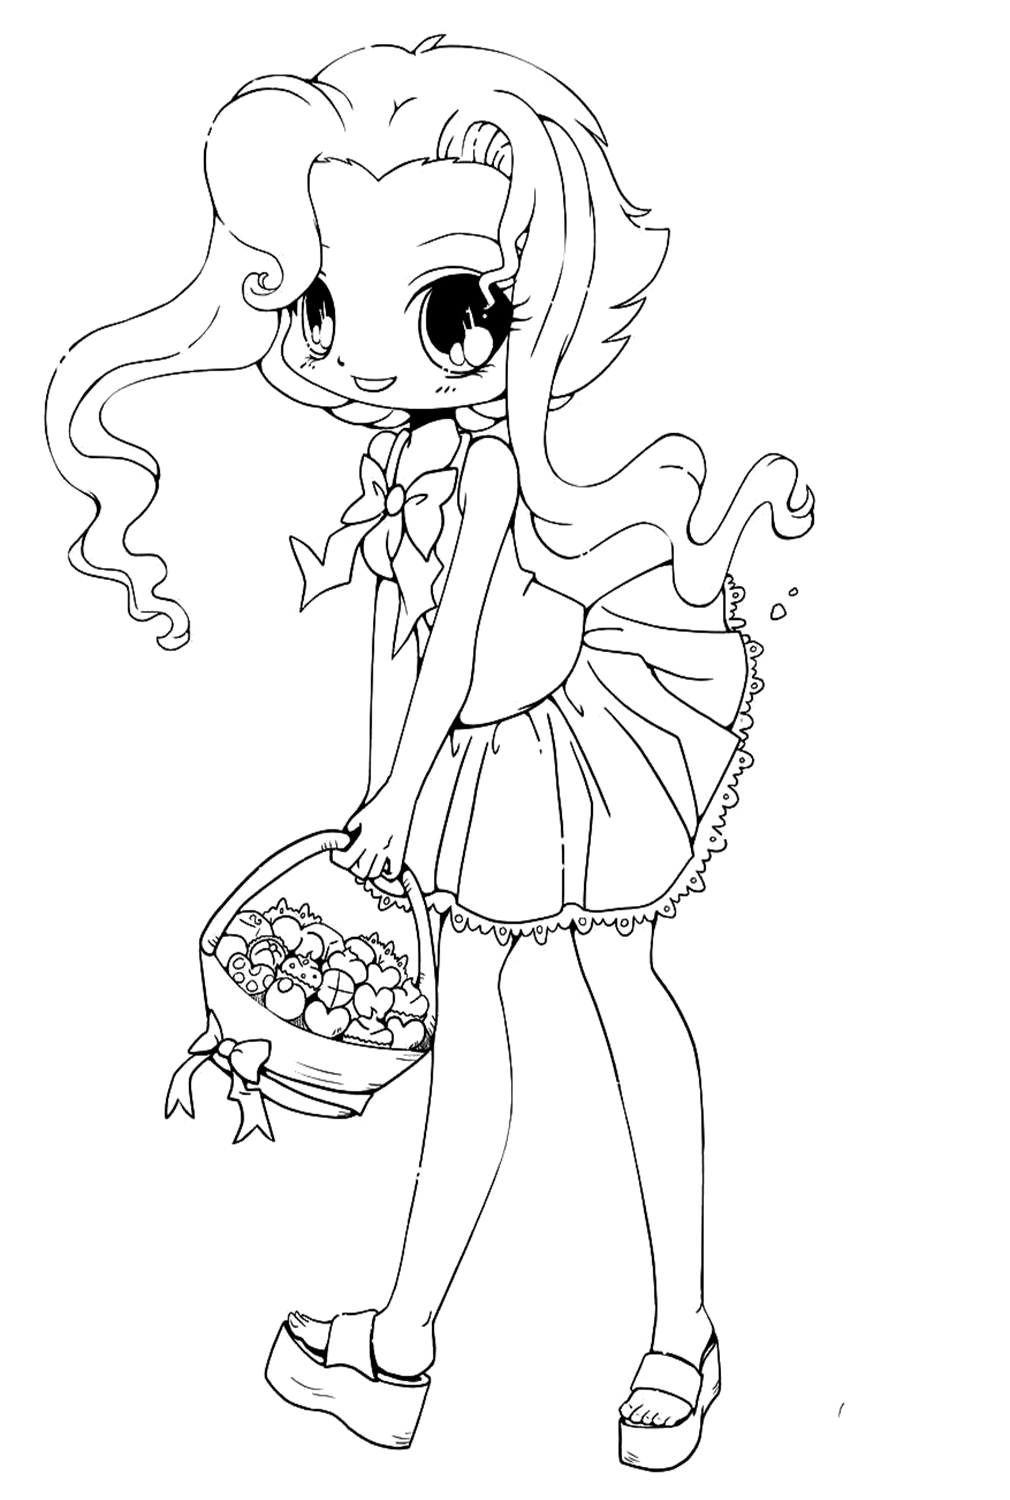 Chibi Girl Has Long And Curly Hair With Blanket Of Candy Coloring Pages